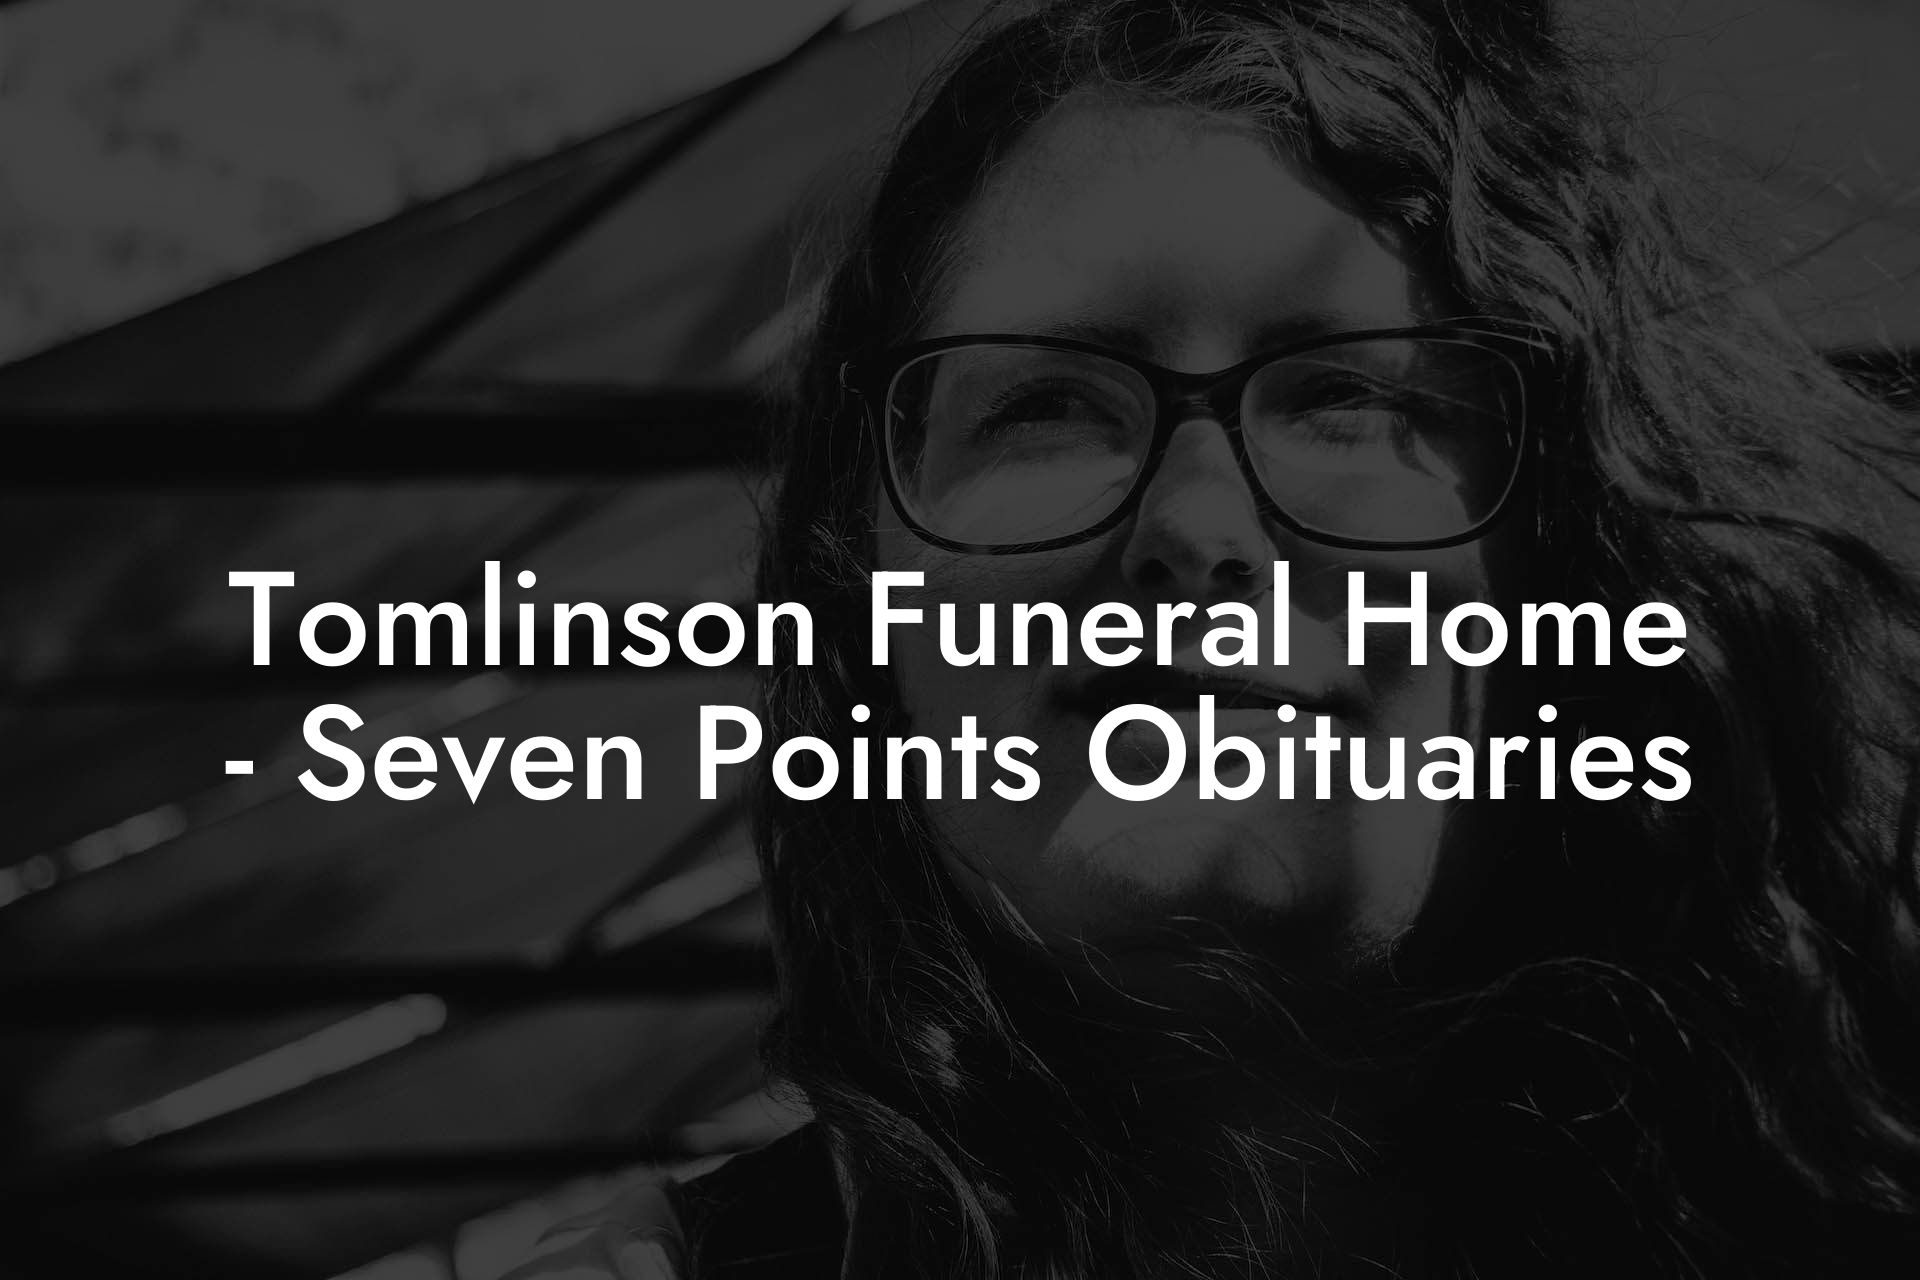 Tomlinson Funeral Home - Seven Points Obituaries